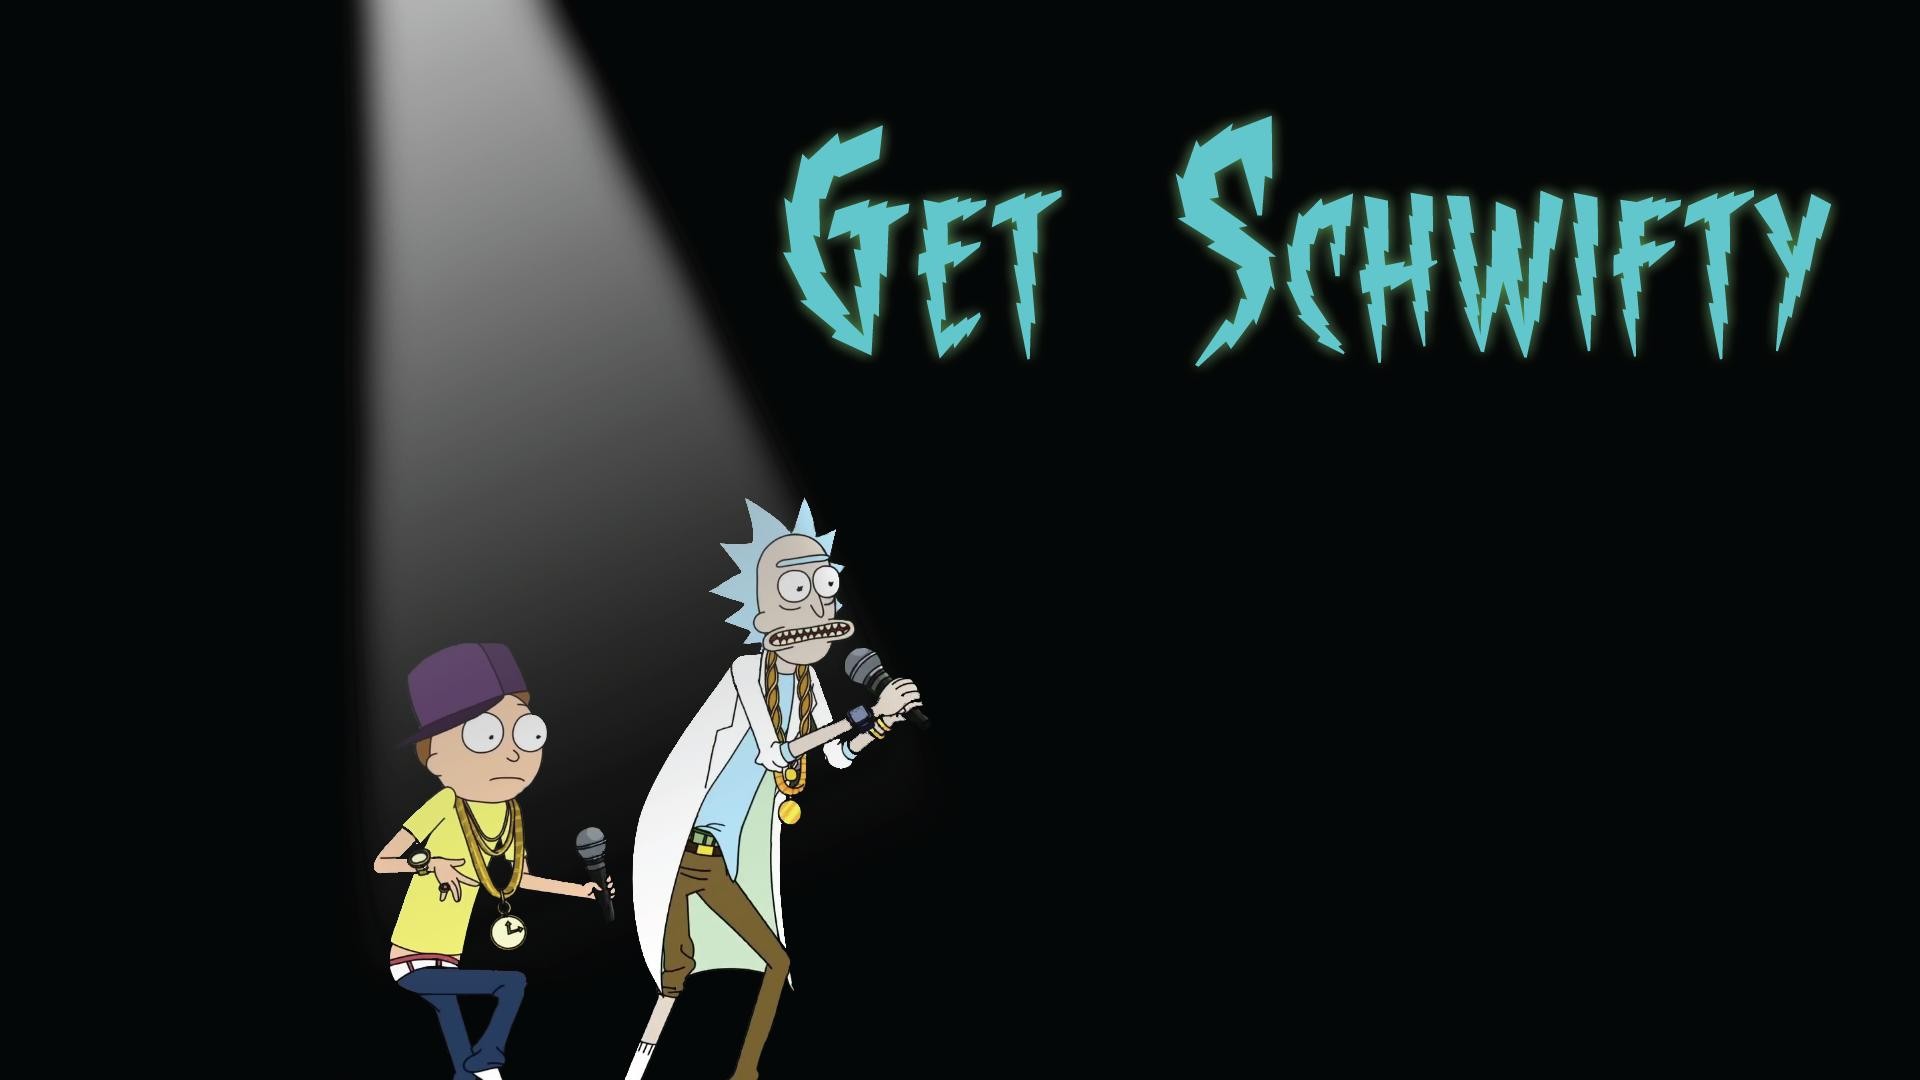 Desktop Wallpaper Rick and Morty Art with image resolution 1920x1080 pixel. You can use this wallpaper as background for your desktop Computer Screensavers, Android or iPhone smartphones